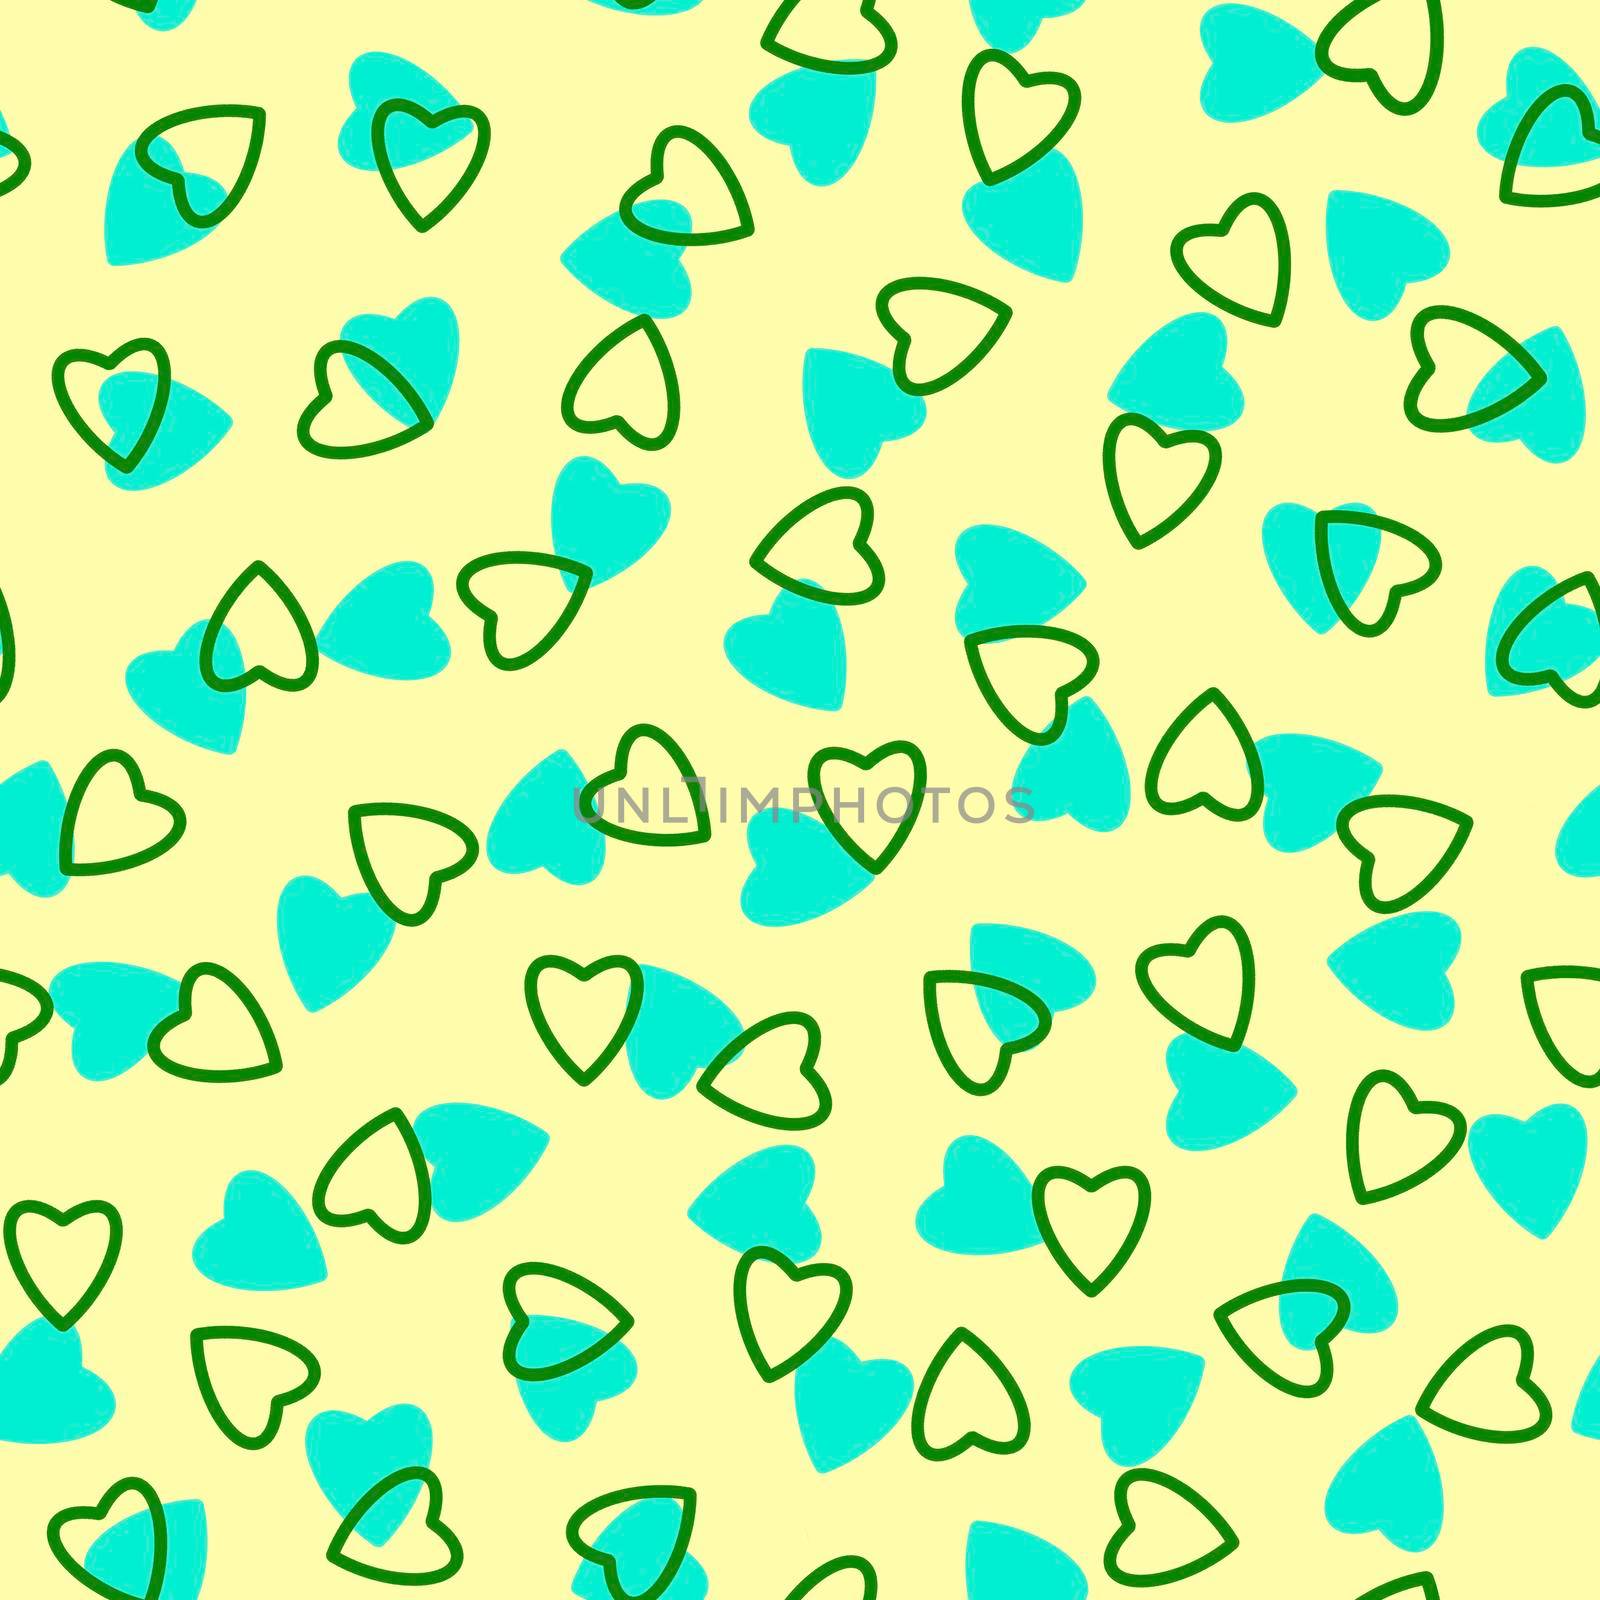 Simple heart seamless pattern,endless chaotic texture made of tiny heart silhouettes.Valentines,mothers day background.Great for Easter,wedding,scrapbook,gift wrapping paper,textiles.Azure,green,Ivory by Angelsmoon